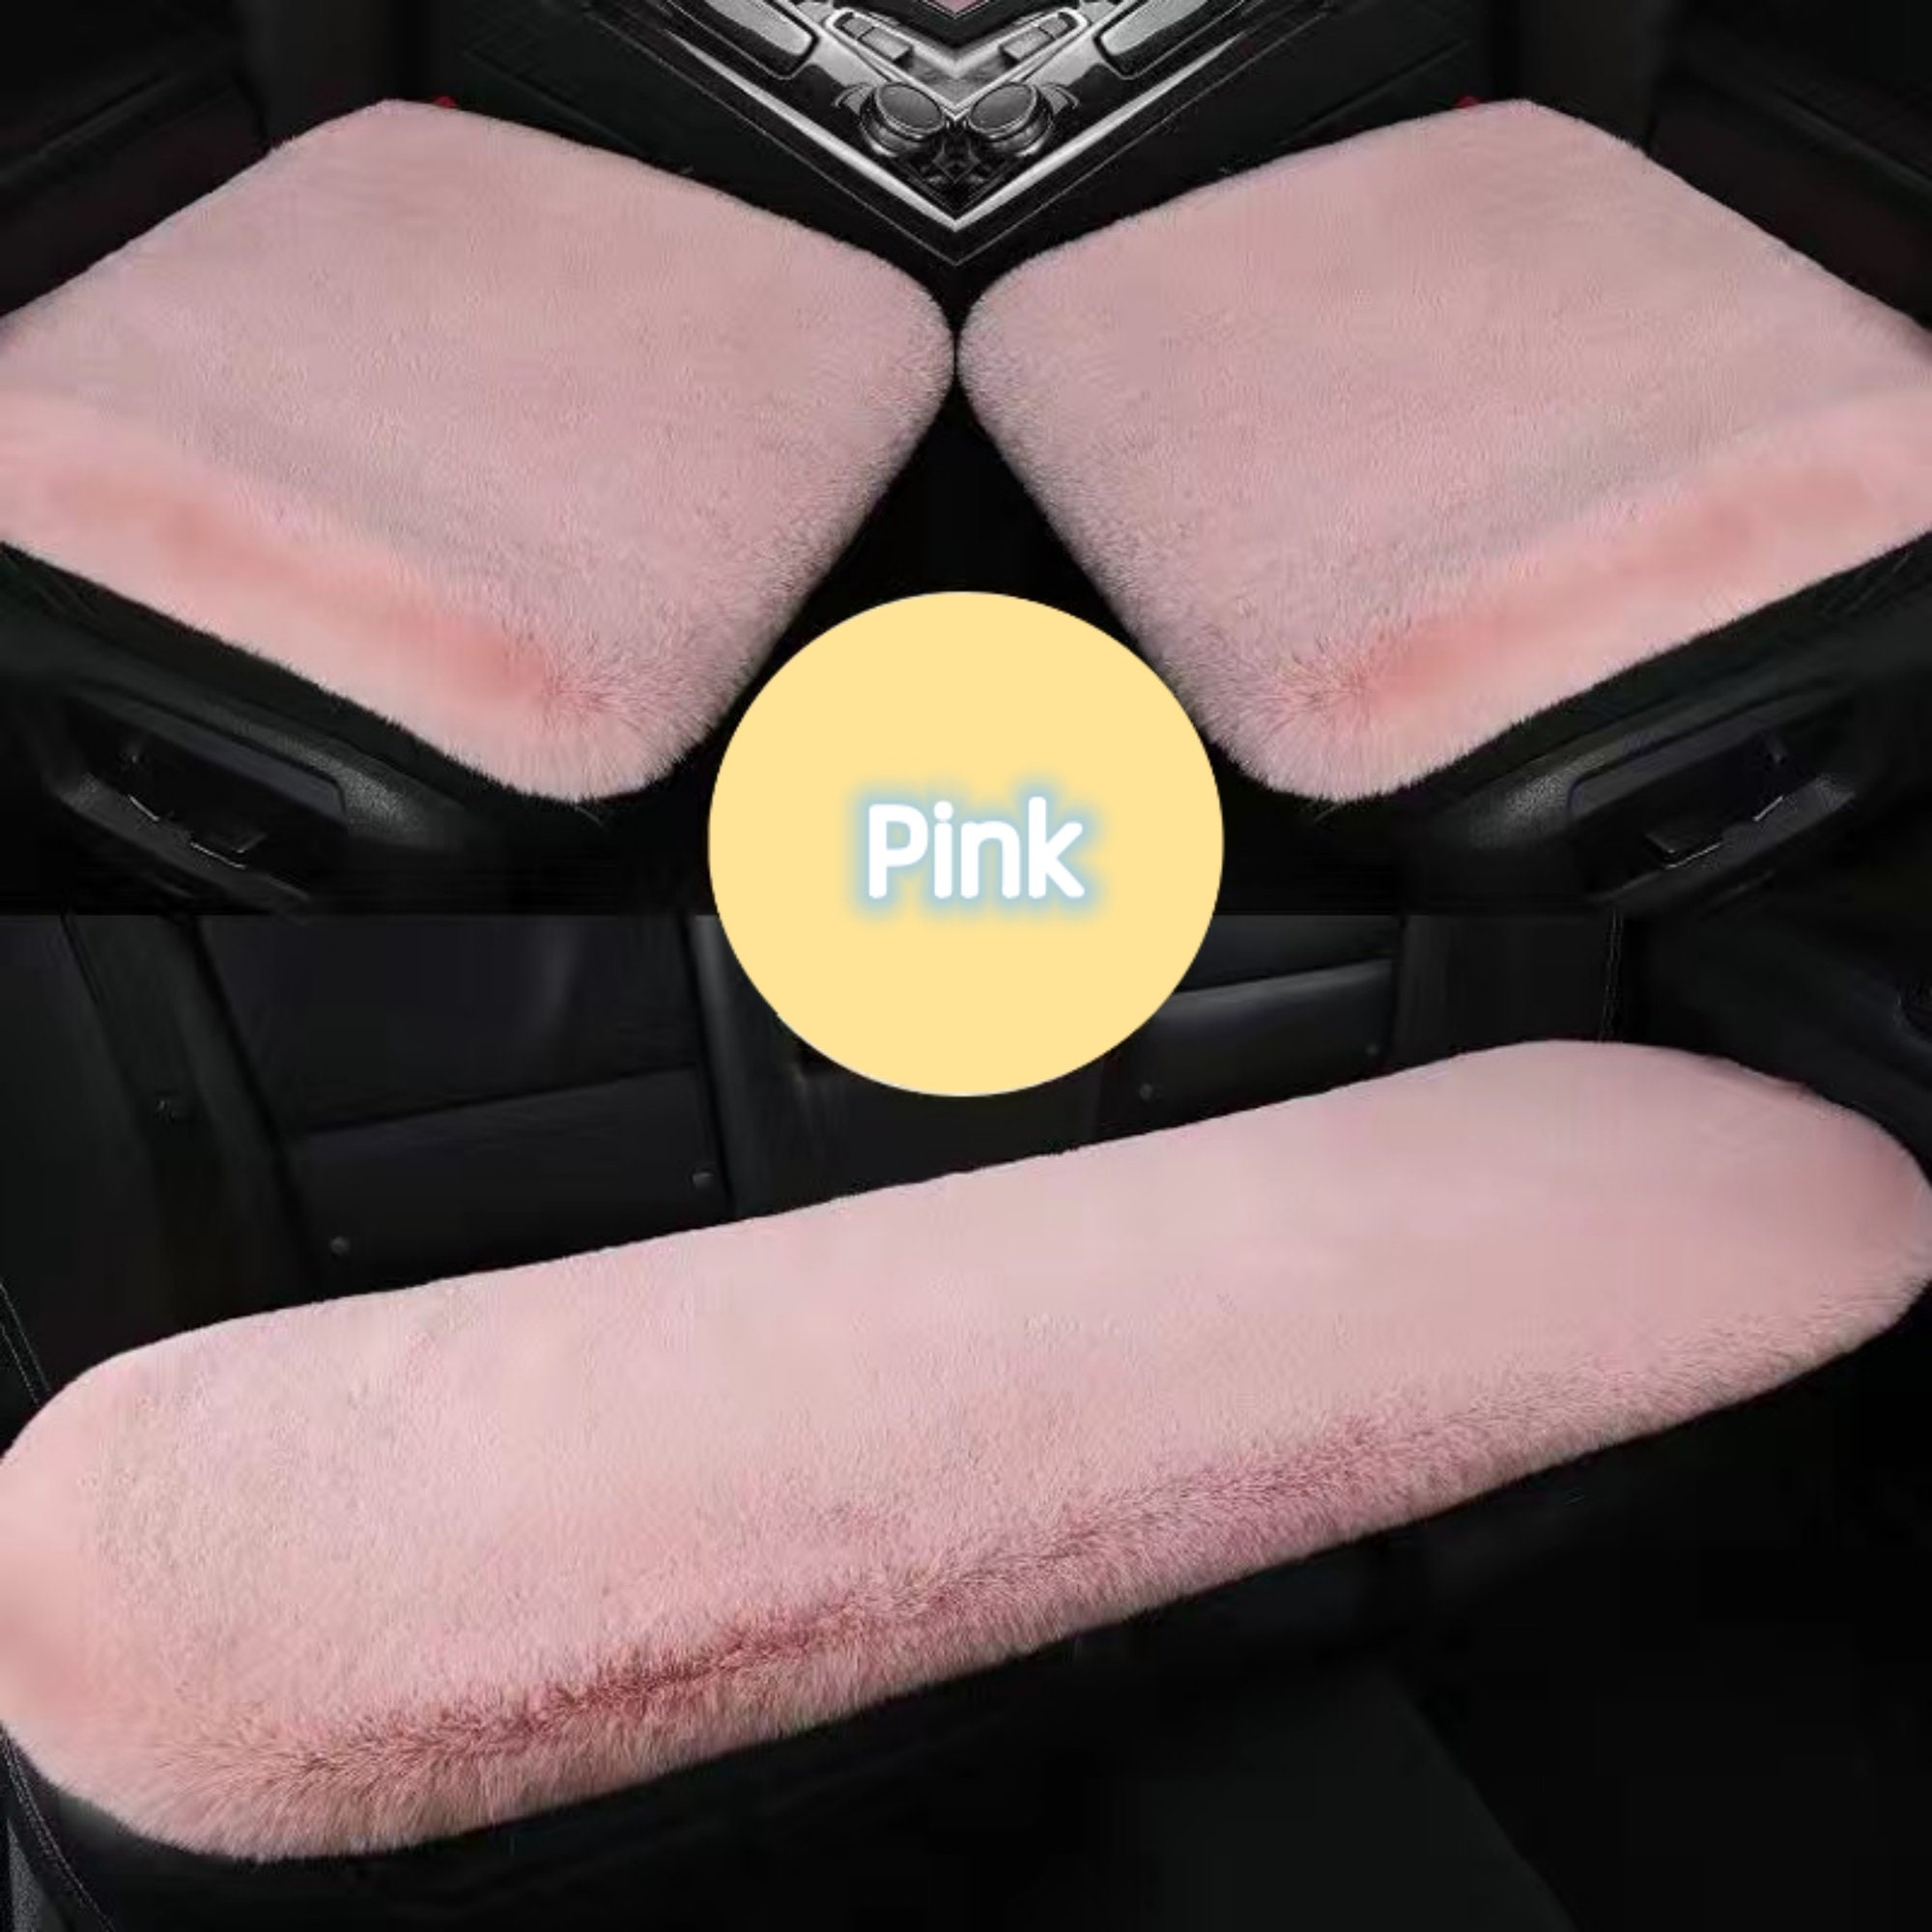 2 Pcs Plush Heart Shaped Pillow with Angel Wings Car Headrest Pillow Soft  Comfortable Car Seat Pillow for Driving Travelling Room Office Car Decor